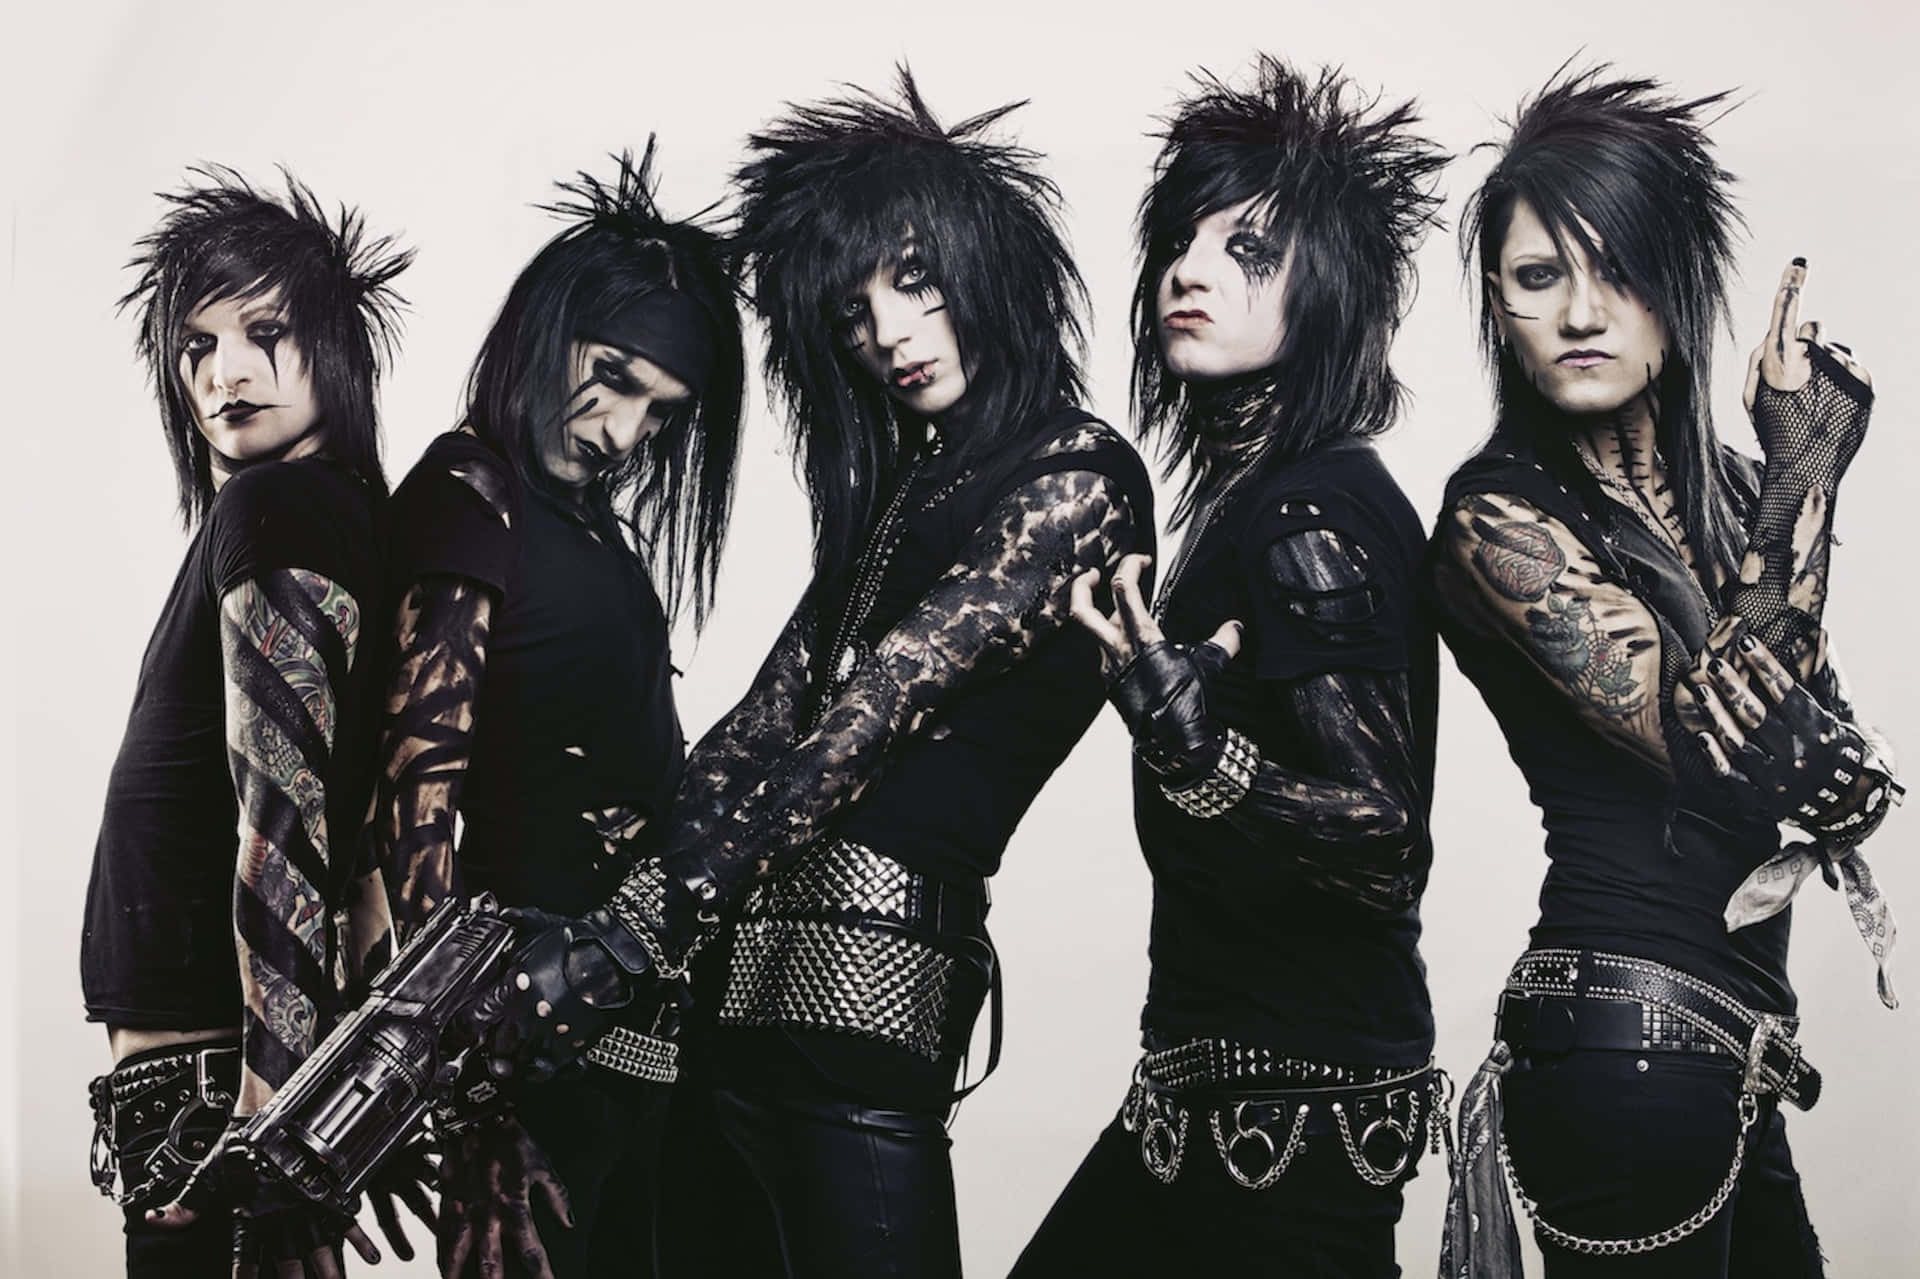 Black Veil Brides, a gothic glam rock band, takes the stage Wallpaper